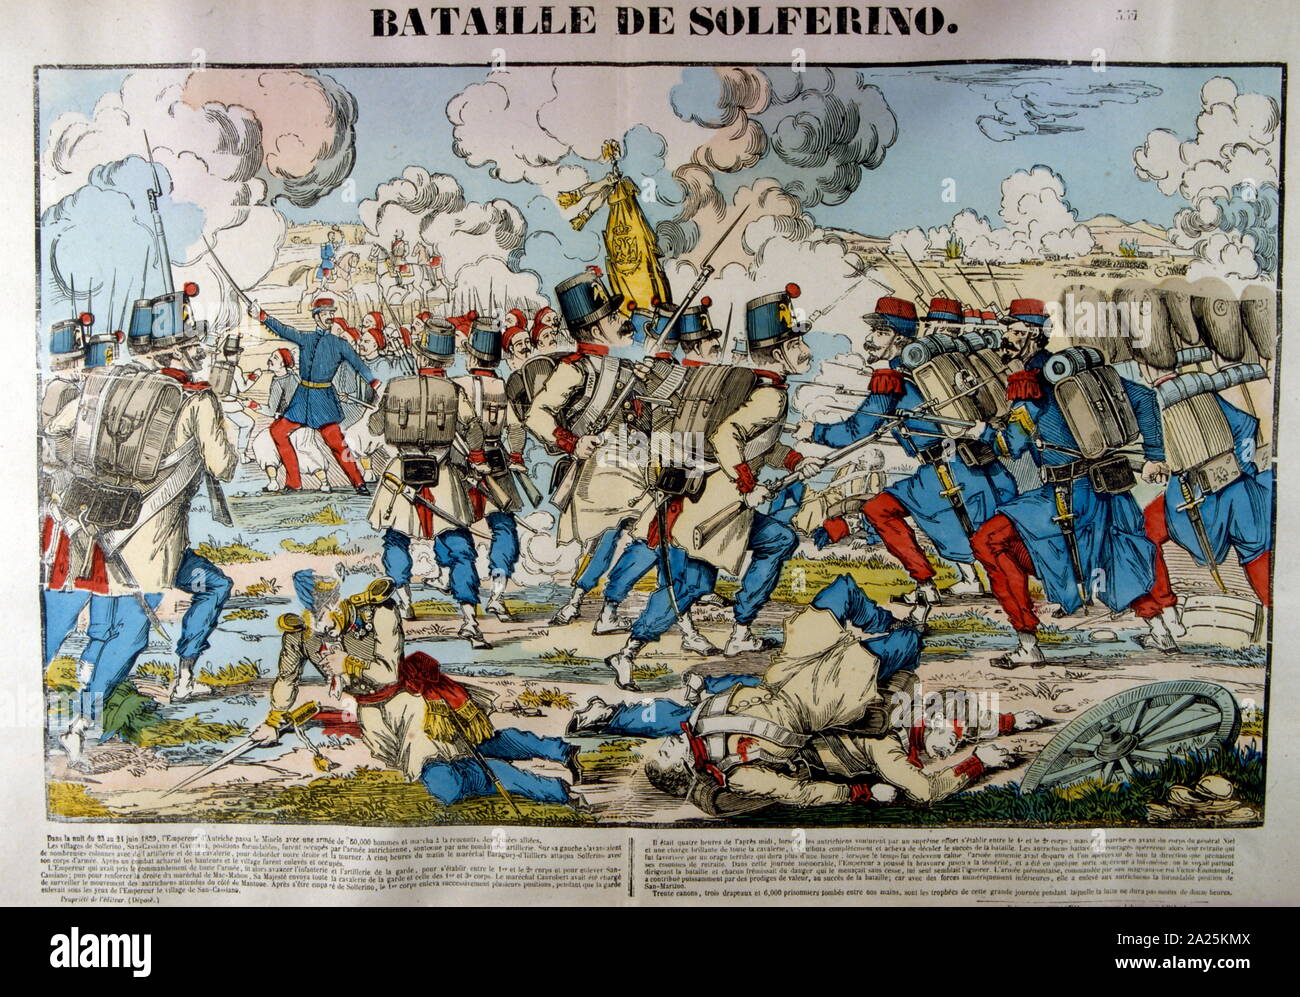 French illustration of the Battle of Solferino (referred to in Italy as the Battle of Solferino and San Martino) on 24 June 1859 resulted in the victory of the allied French Army under Napoleon III and Sardinian Army under Victor Emmanuel II (together known as the Franco-Sardinian Alliance) against the Austrian Army under Emperor Franz Joseph I. It was the last major battle in world history where all the armies were under the personal command of their monarchs. Stock Photo